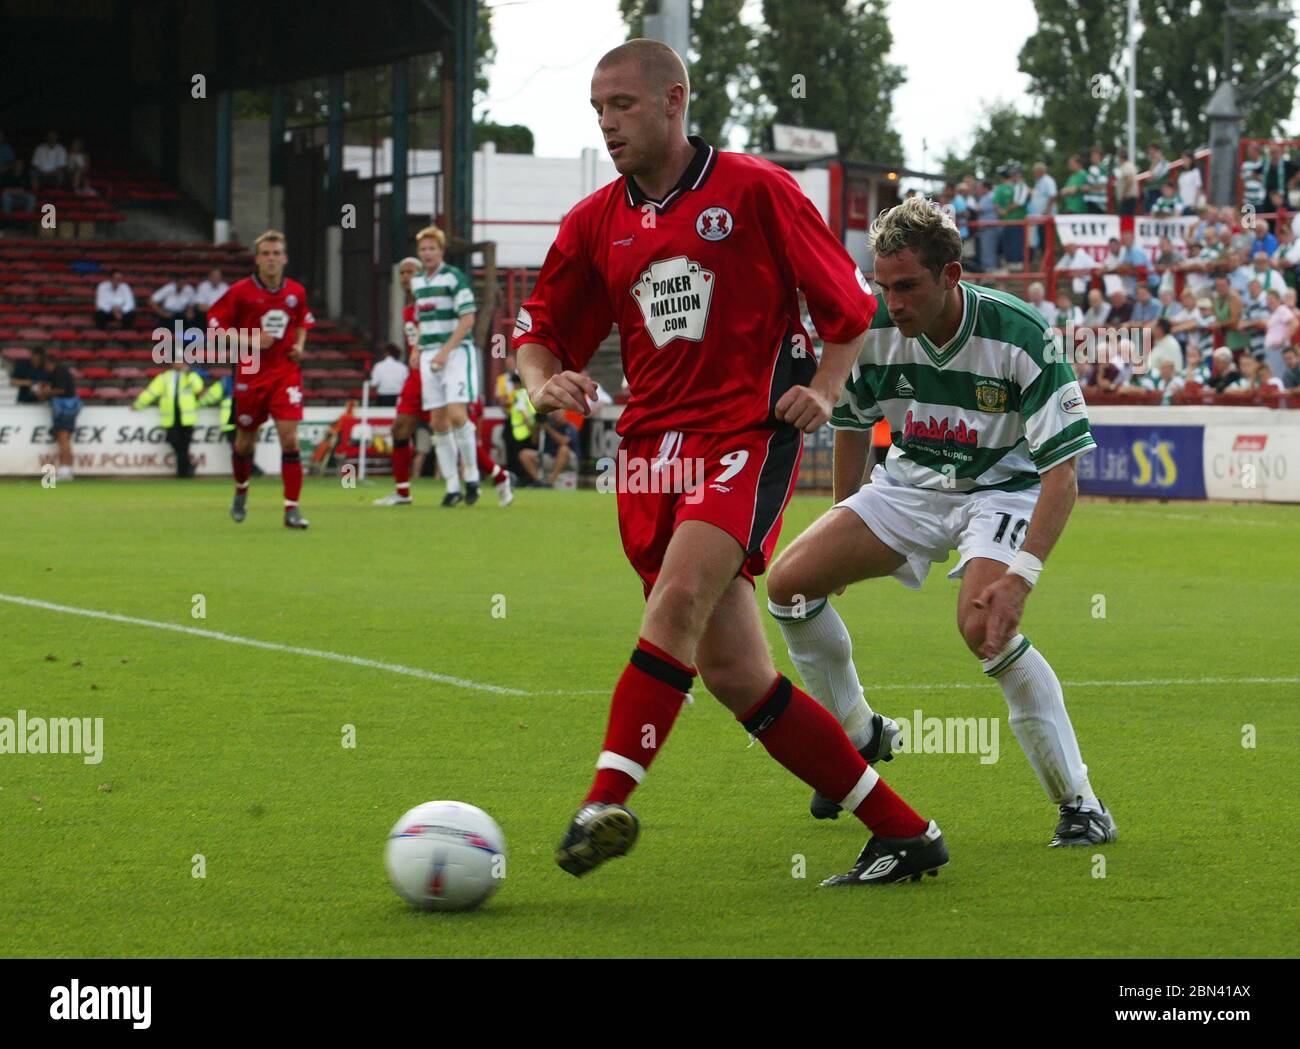 LONDON, UK. AUGUST 23: Gary Alexander of Leyton Orient during League Division 3 between Leyton Orient and Yeovil Town at Matchroom stadium, London on Stock Photo